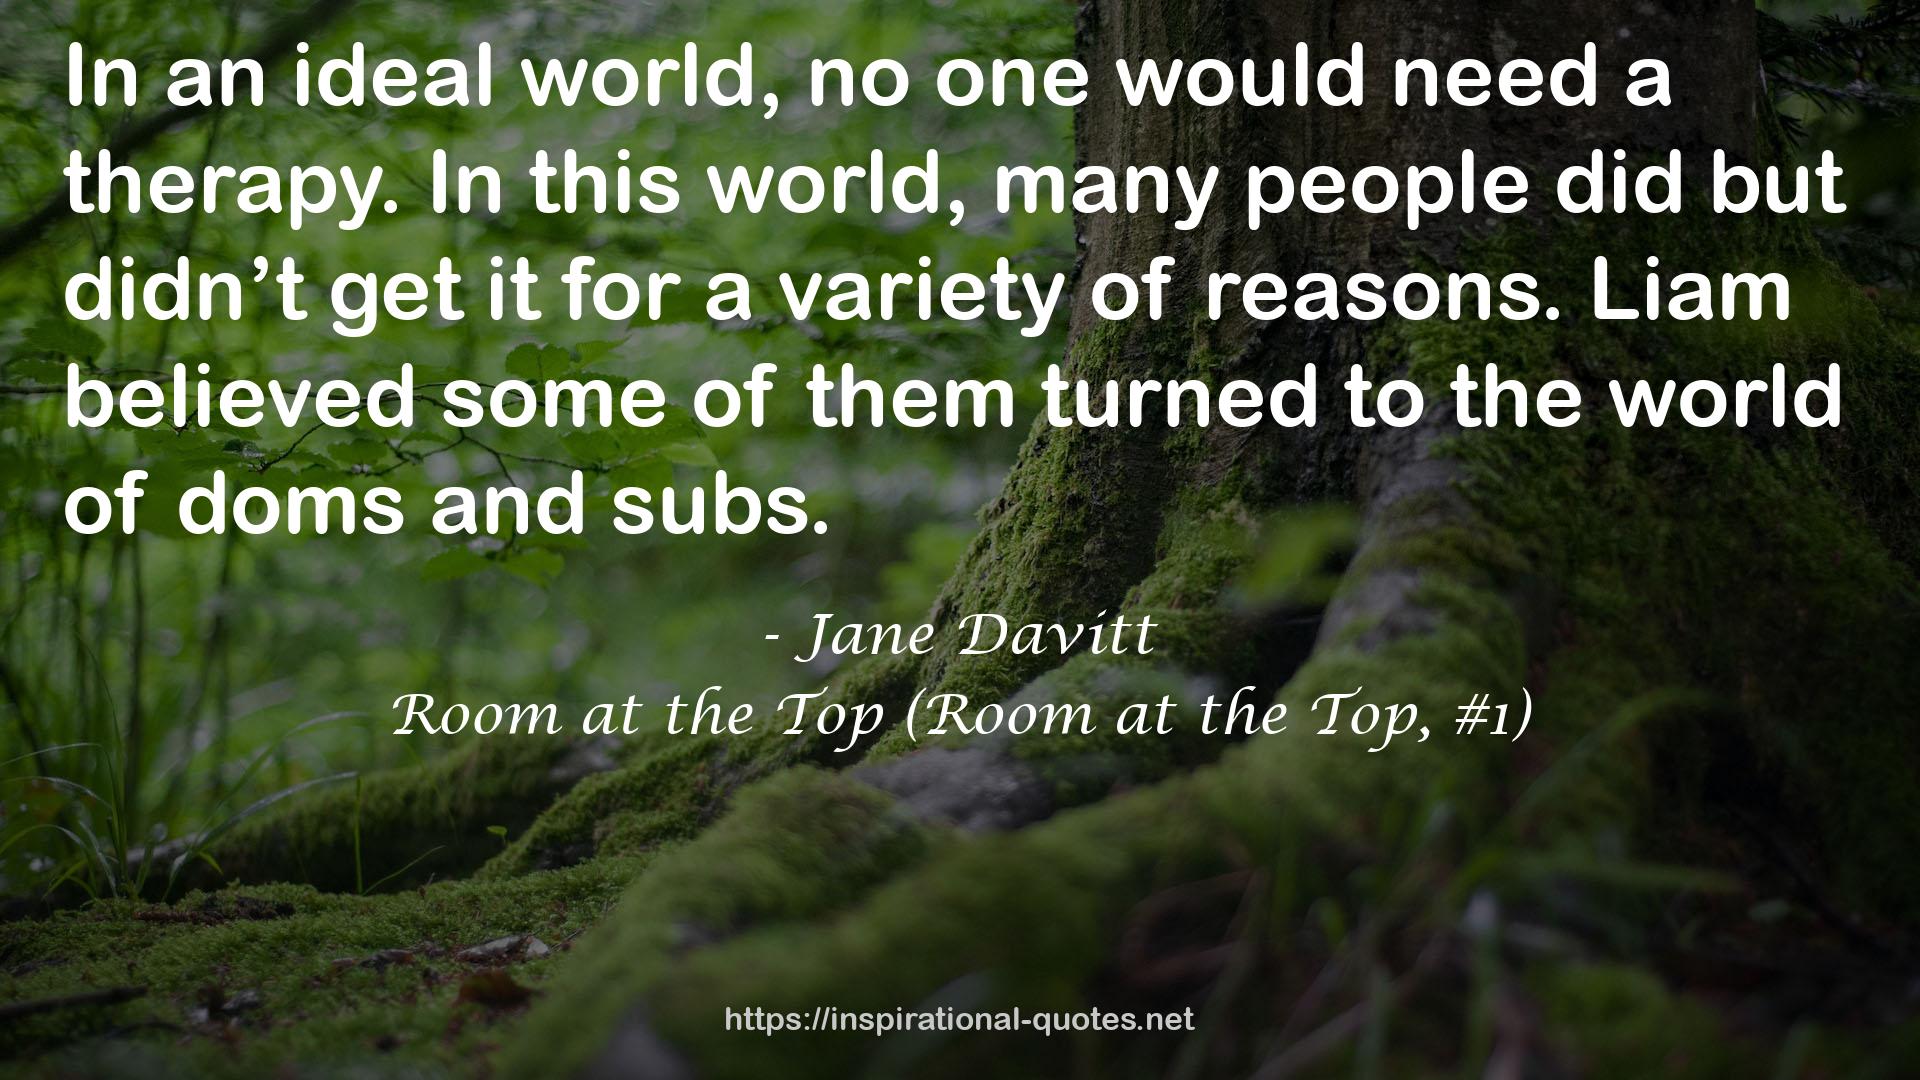 Room at the Top (Room at the Top, #1) QUOTES